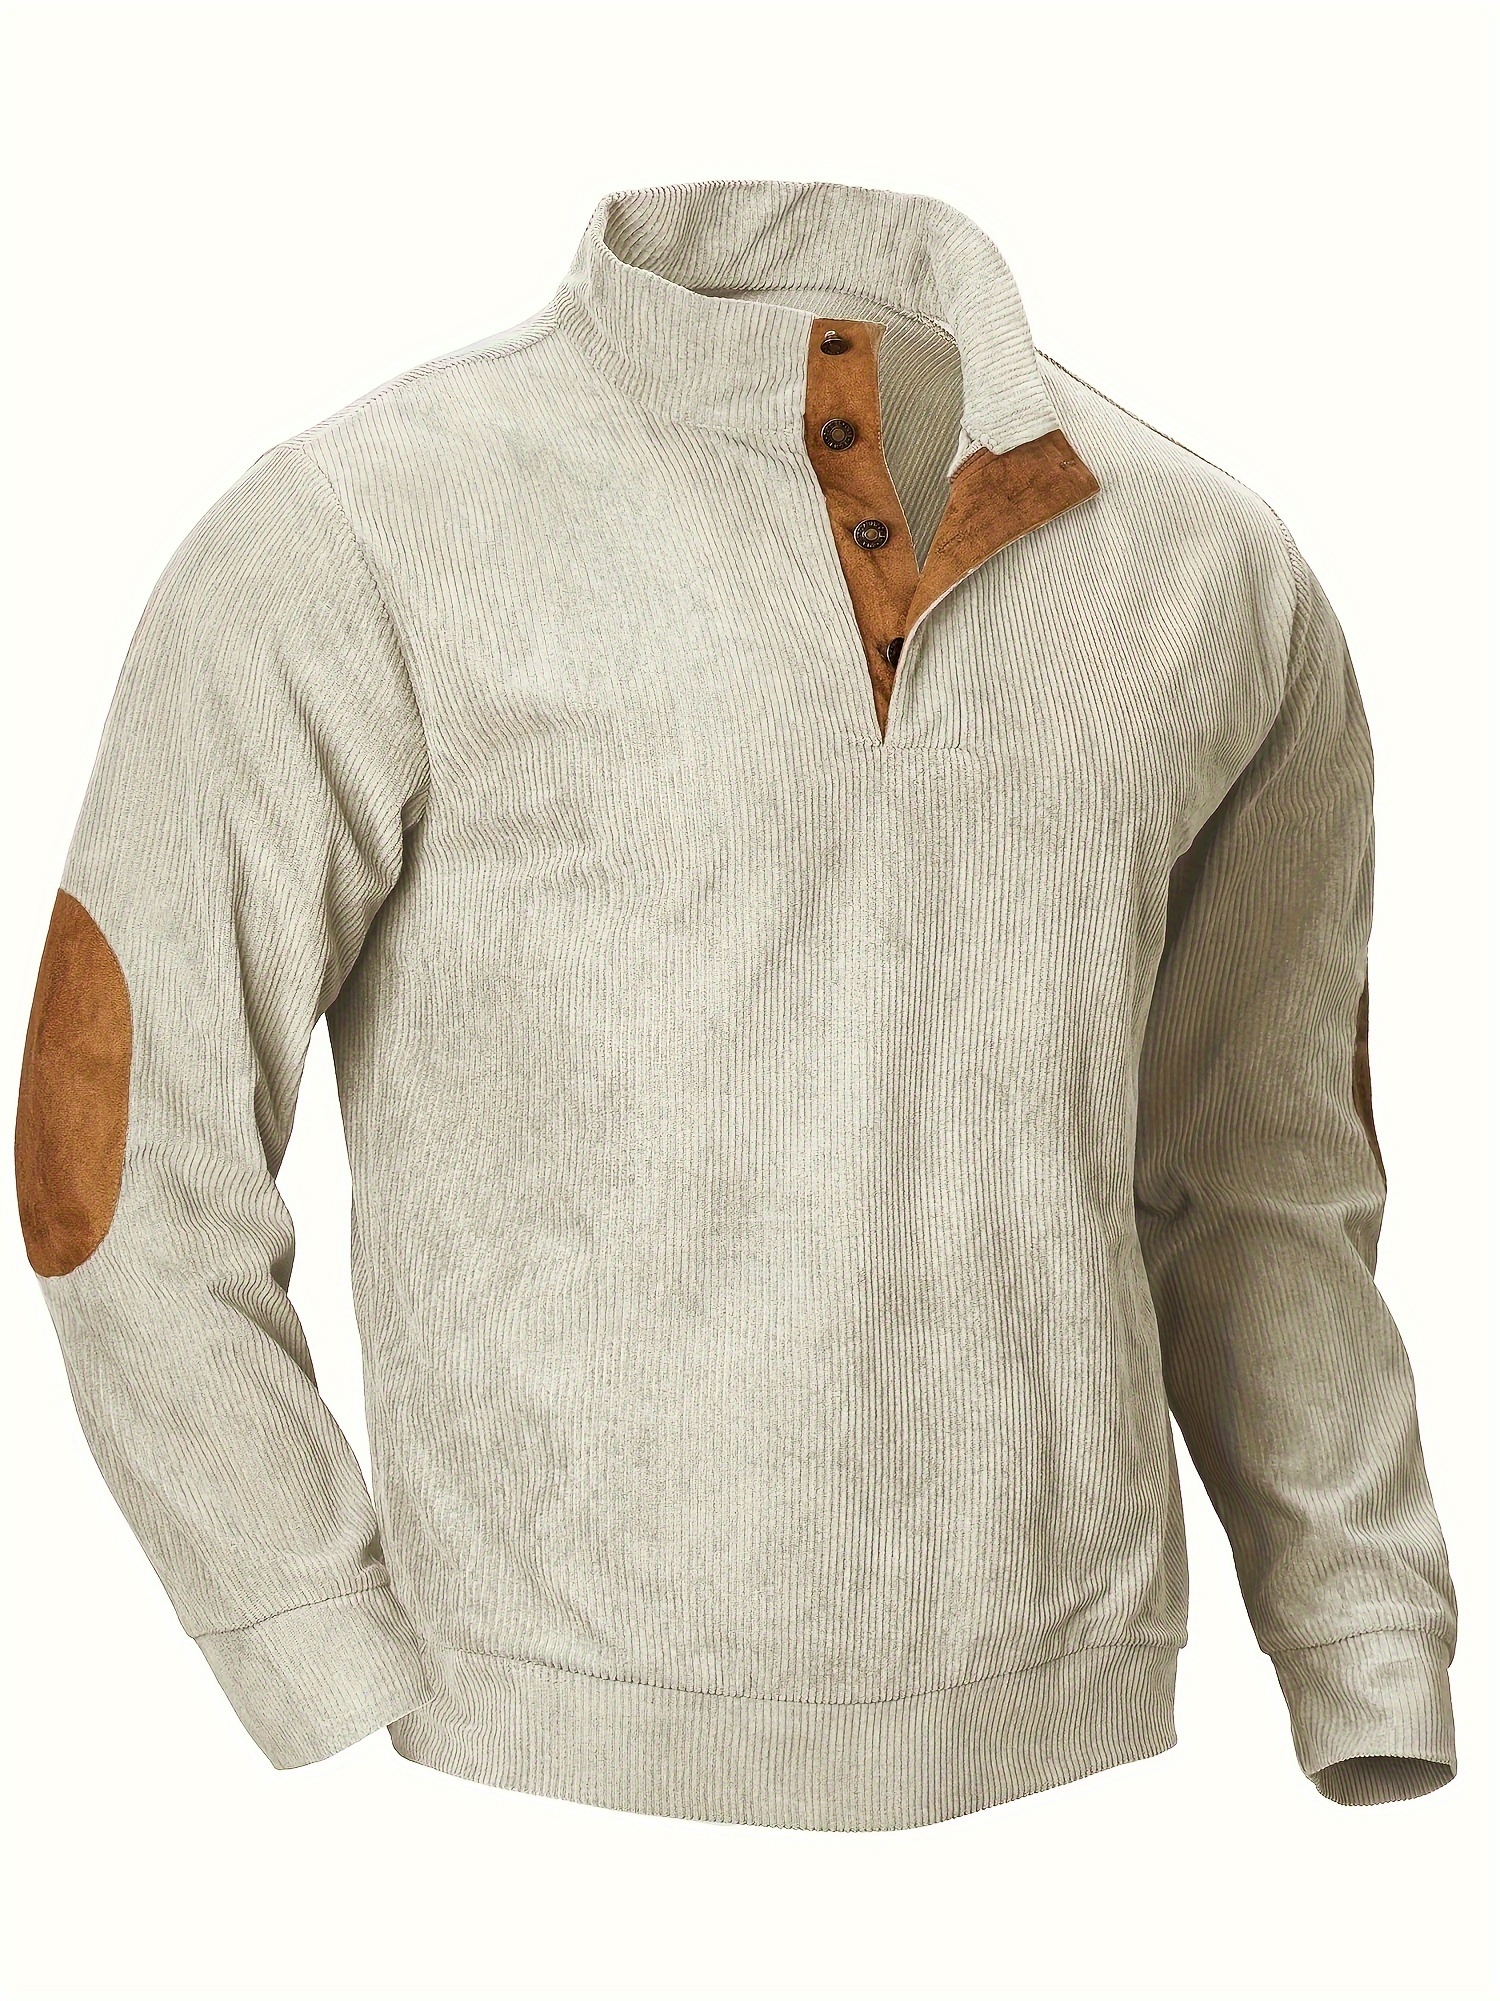 Ribbed Men's Casual Retro Stand Collar Thick Long Sleeve Henry